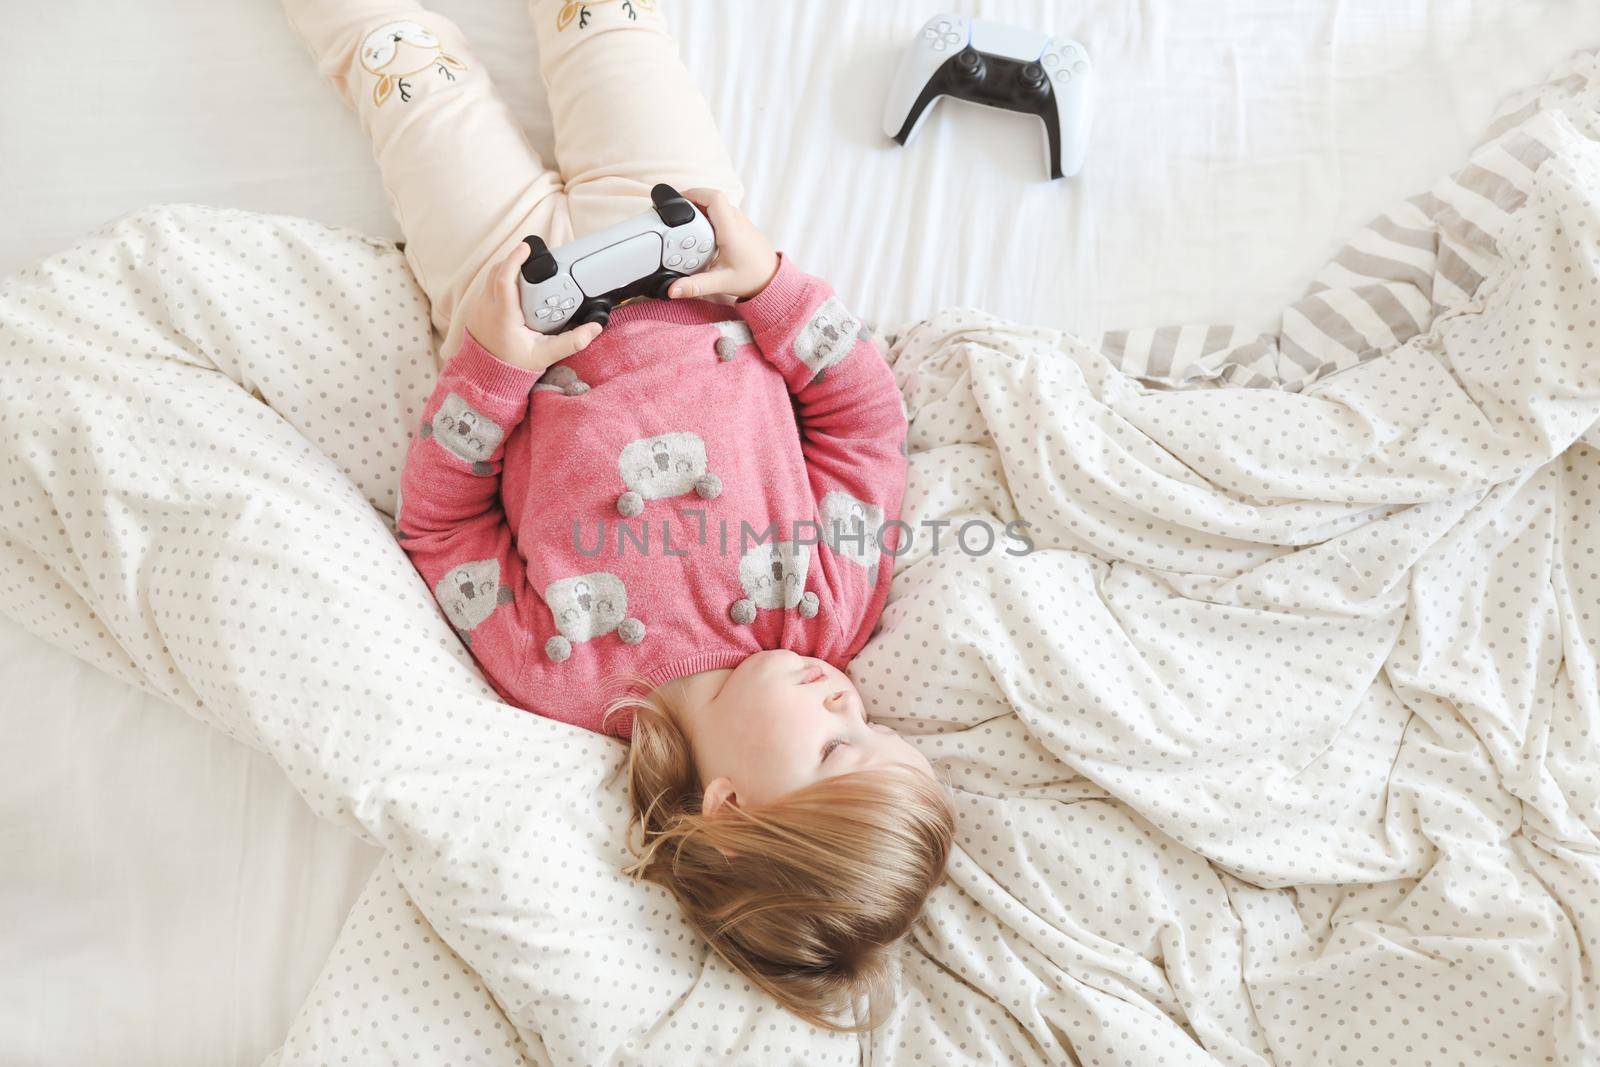 Little cute girl playing with joystick in bed at home